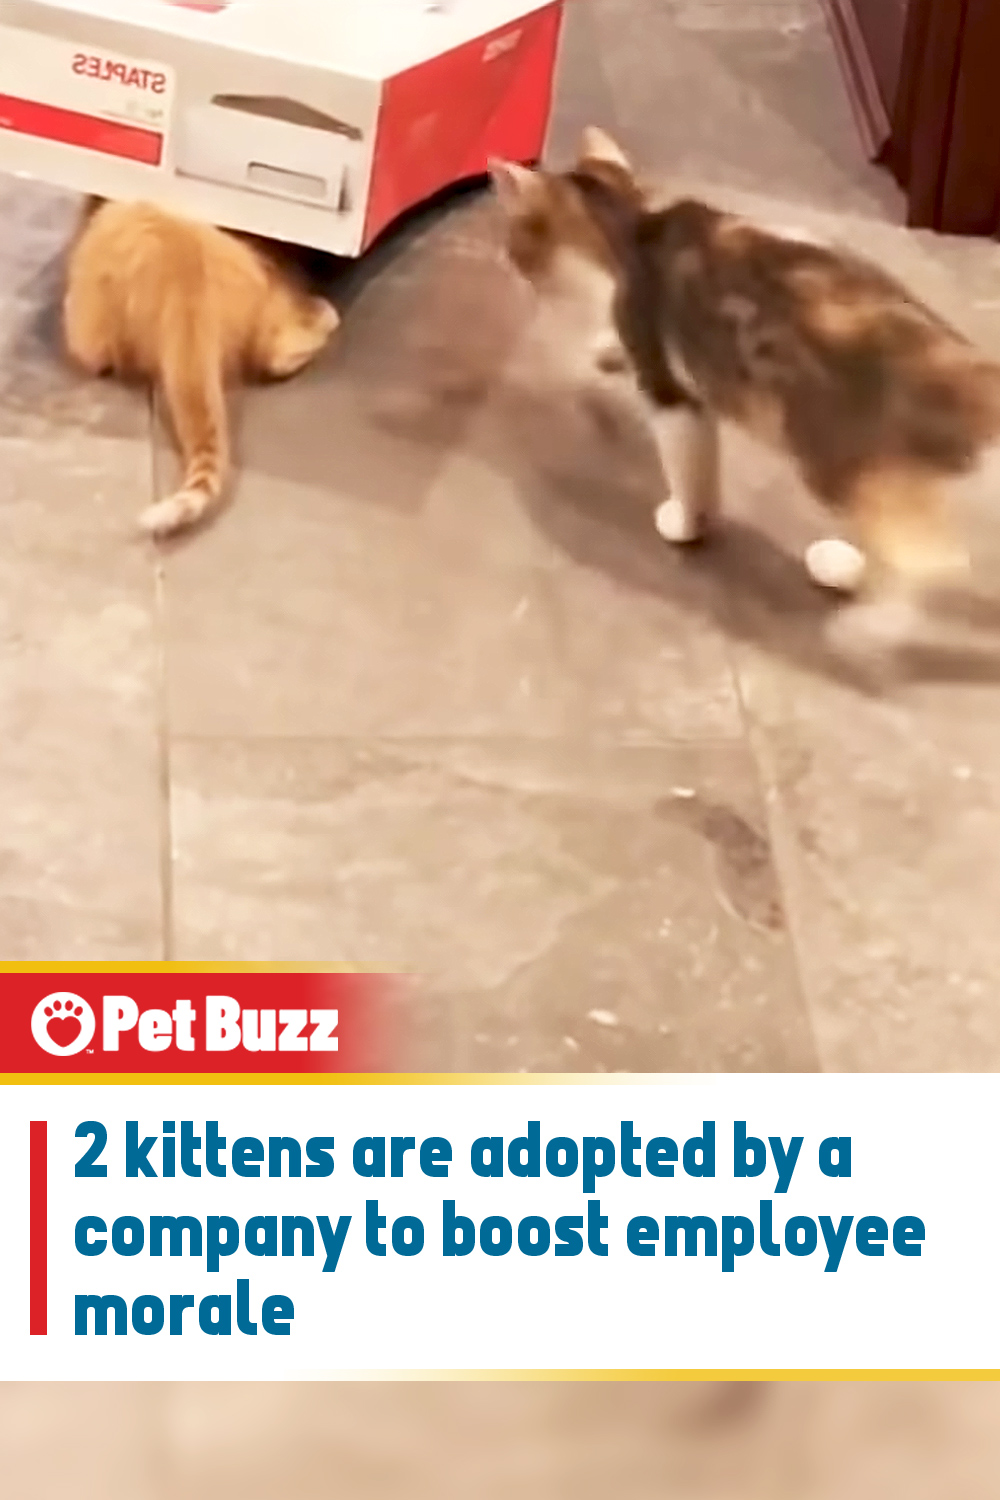 2 kittens are adopted by a company to boost employee morale